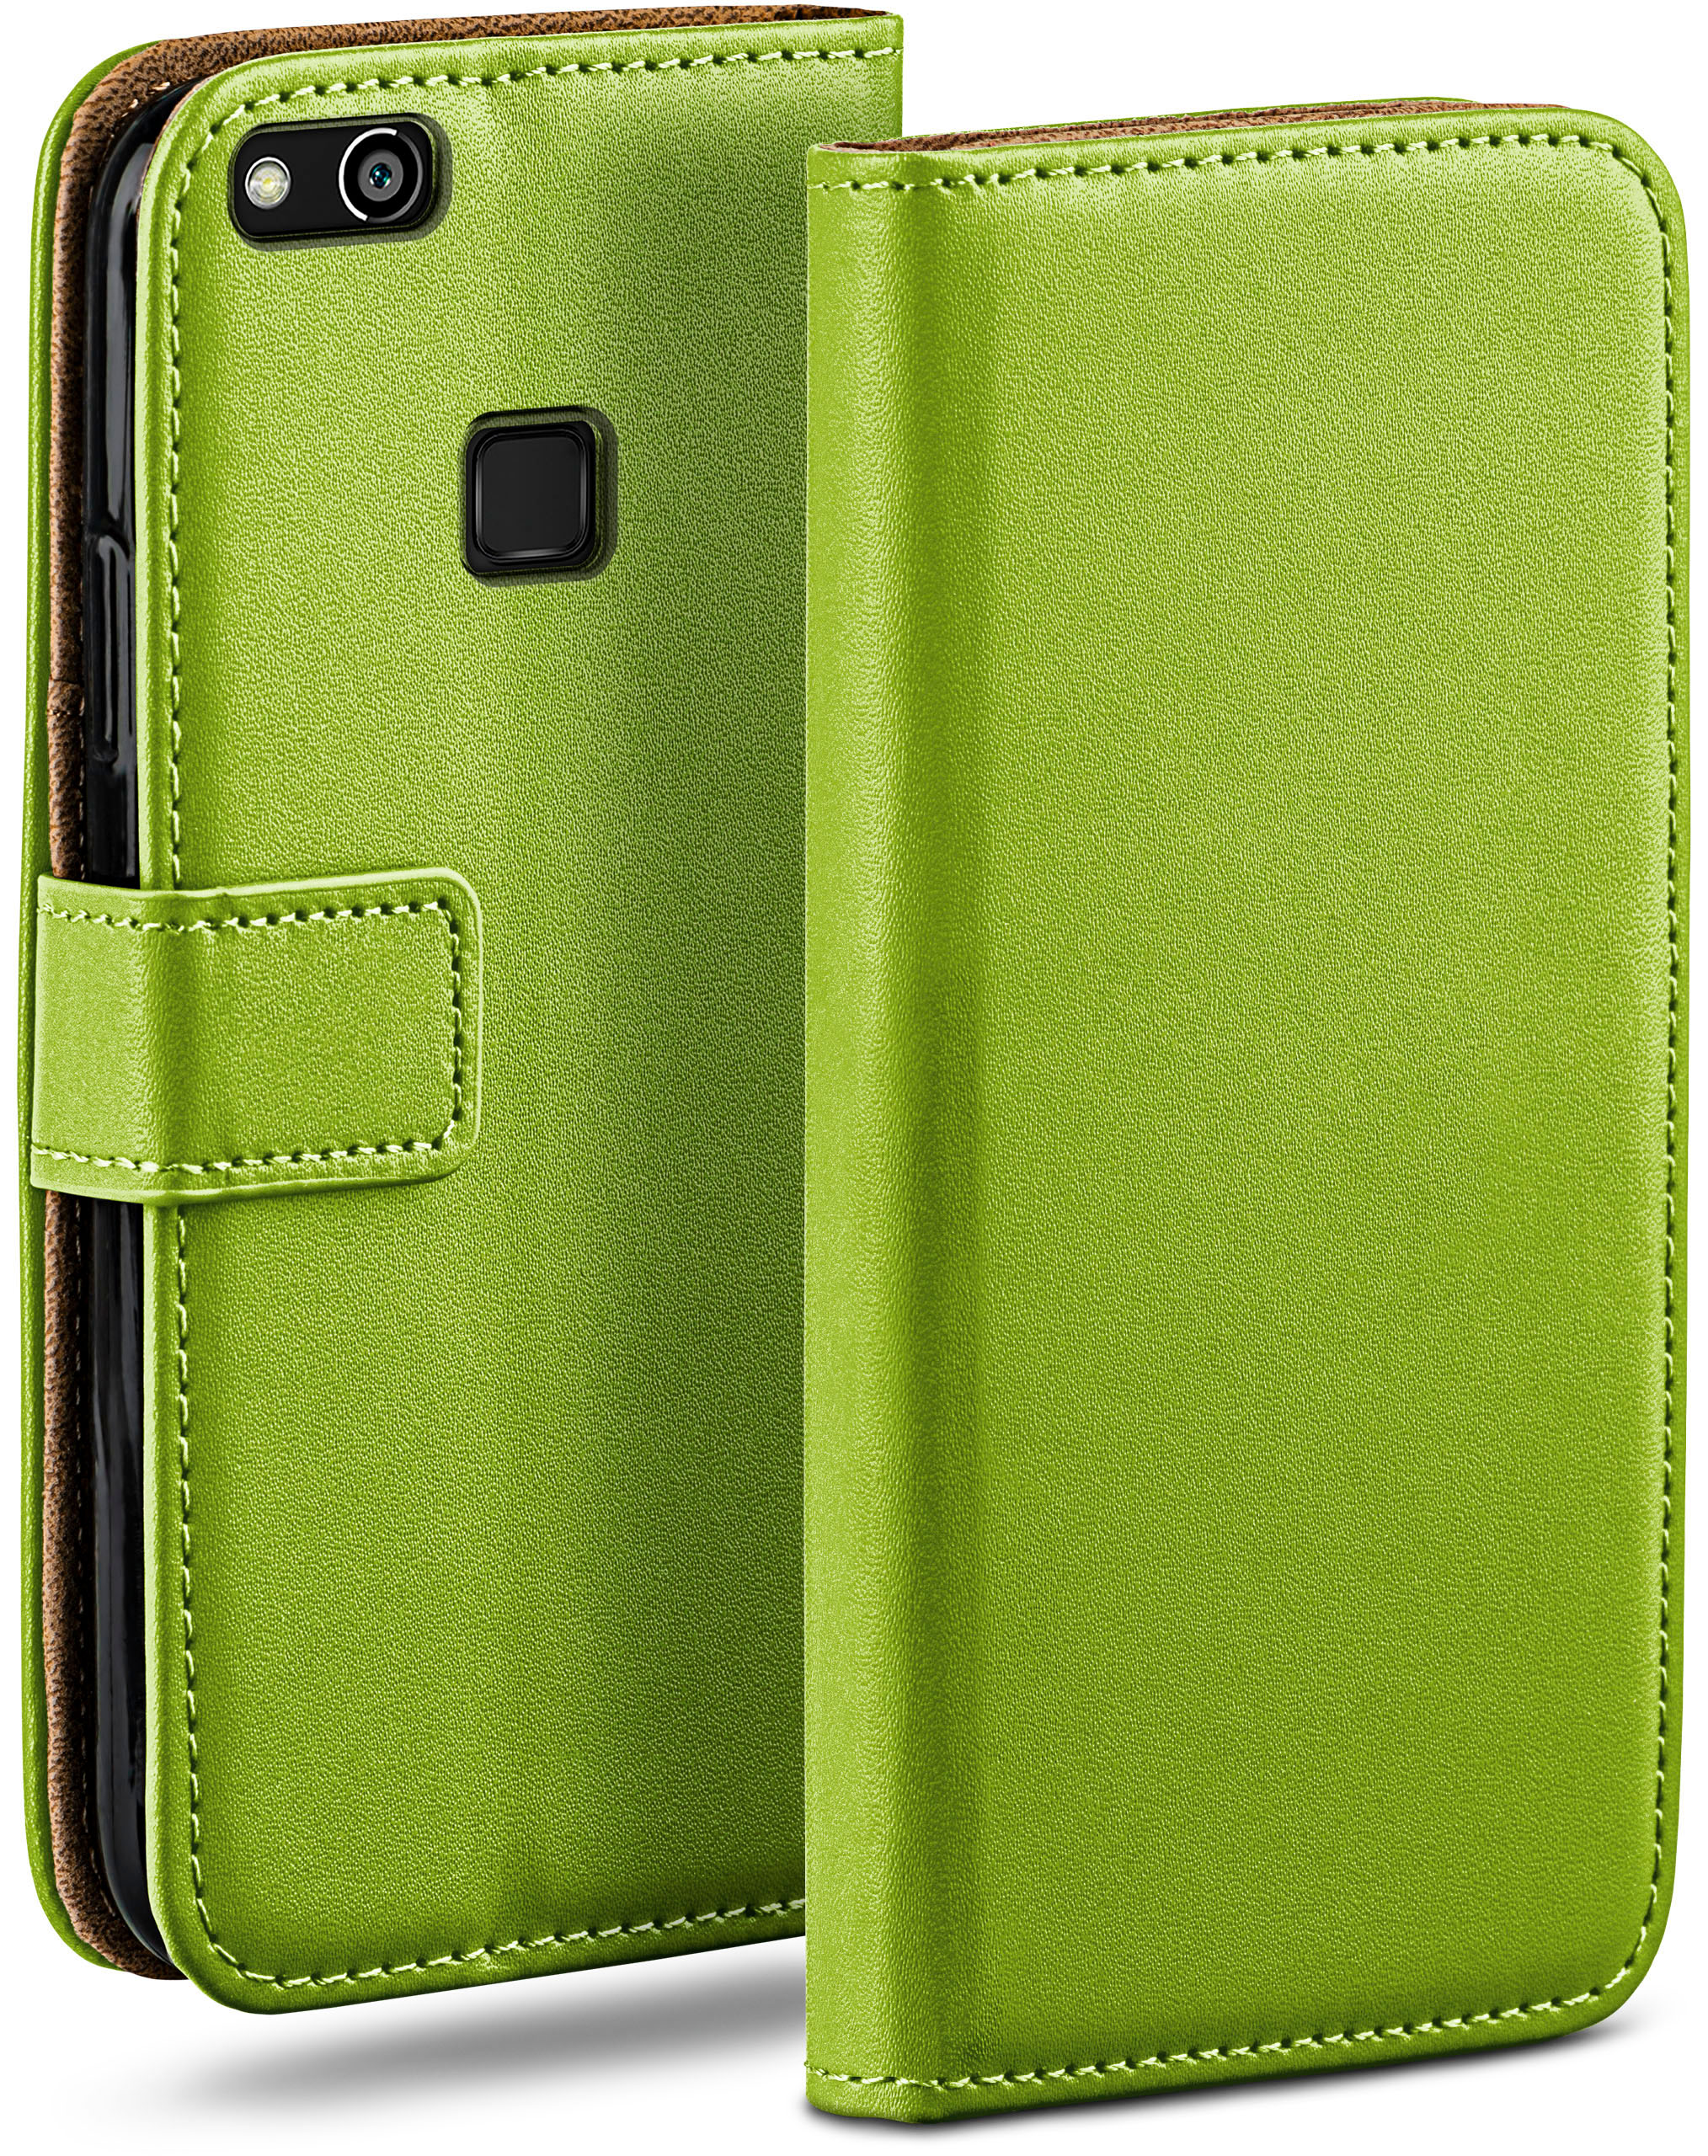 Book MOEX Case, Bookcover, Lime-Green Huawei, P10 Lite,